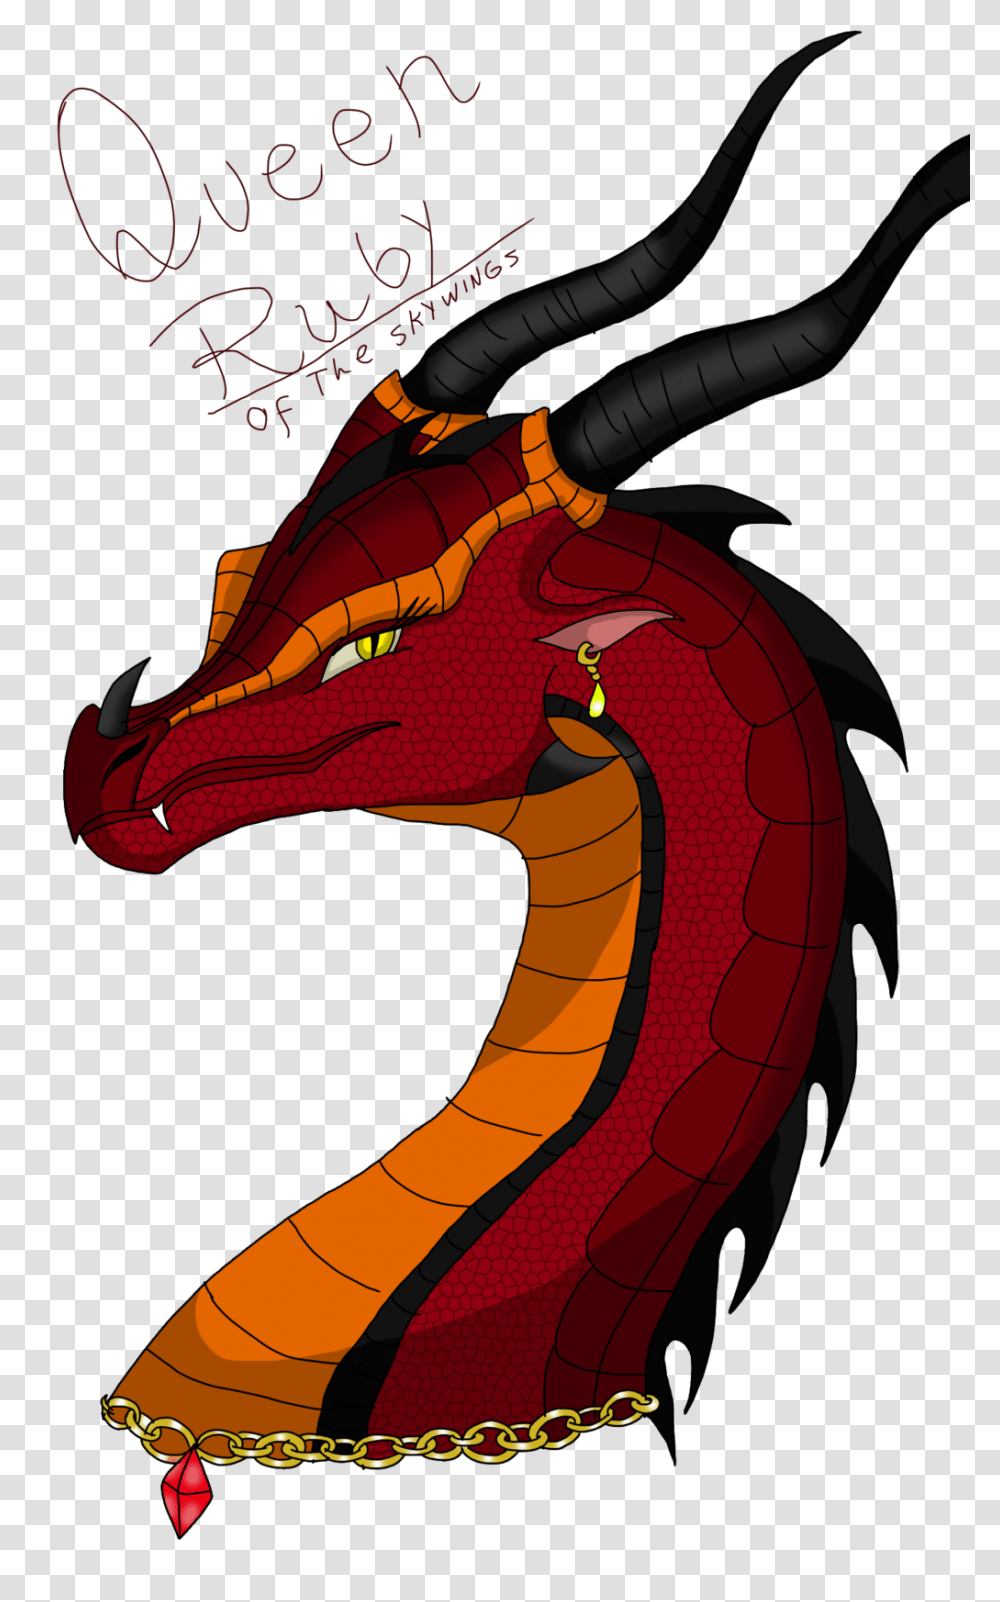 Wings Of Fire In Dragones, Animal, Snake, Reptile Transparent Png